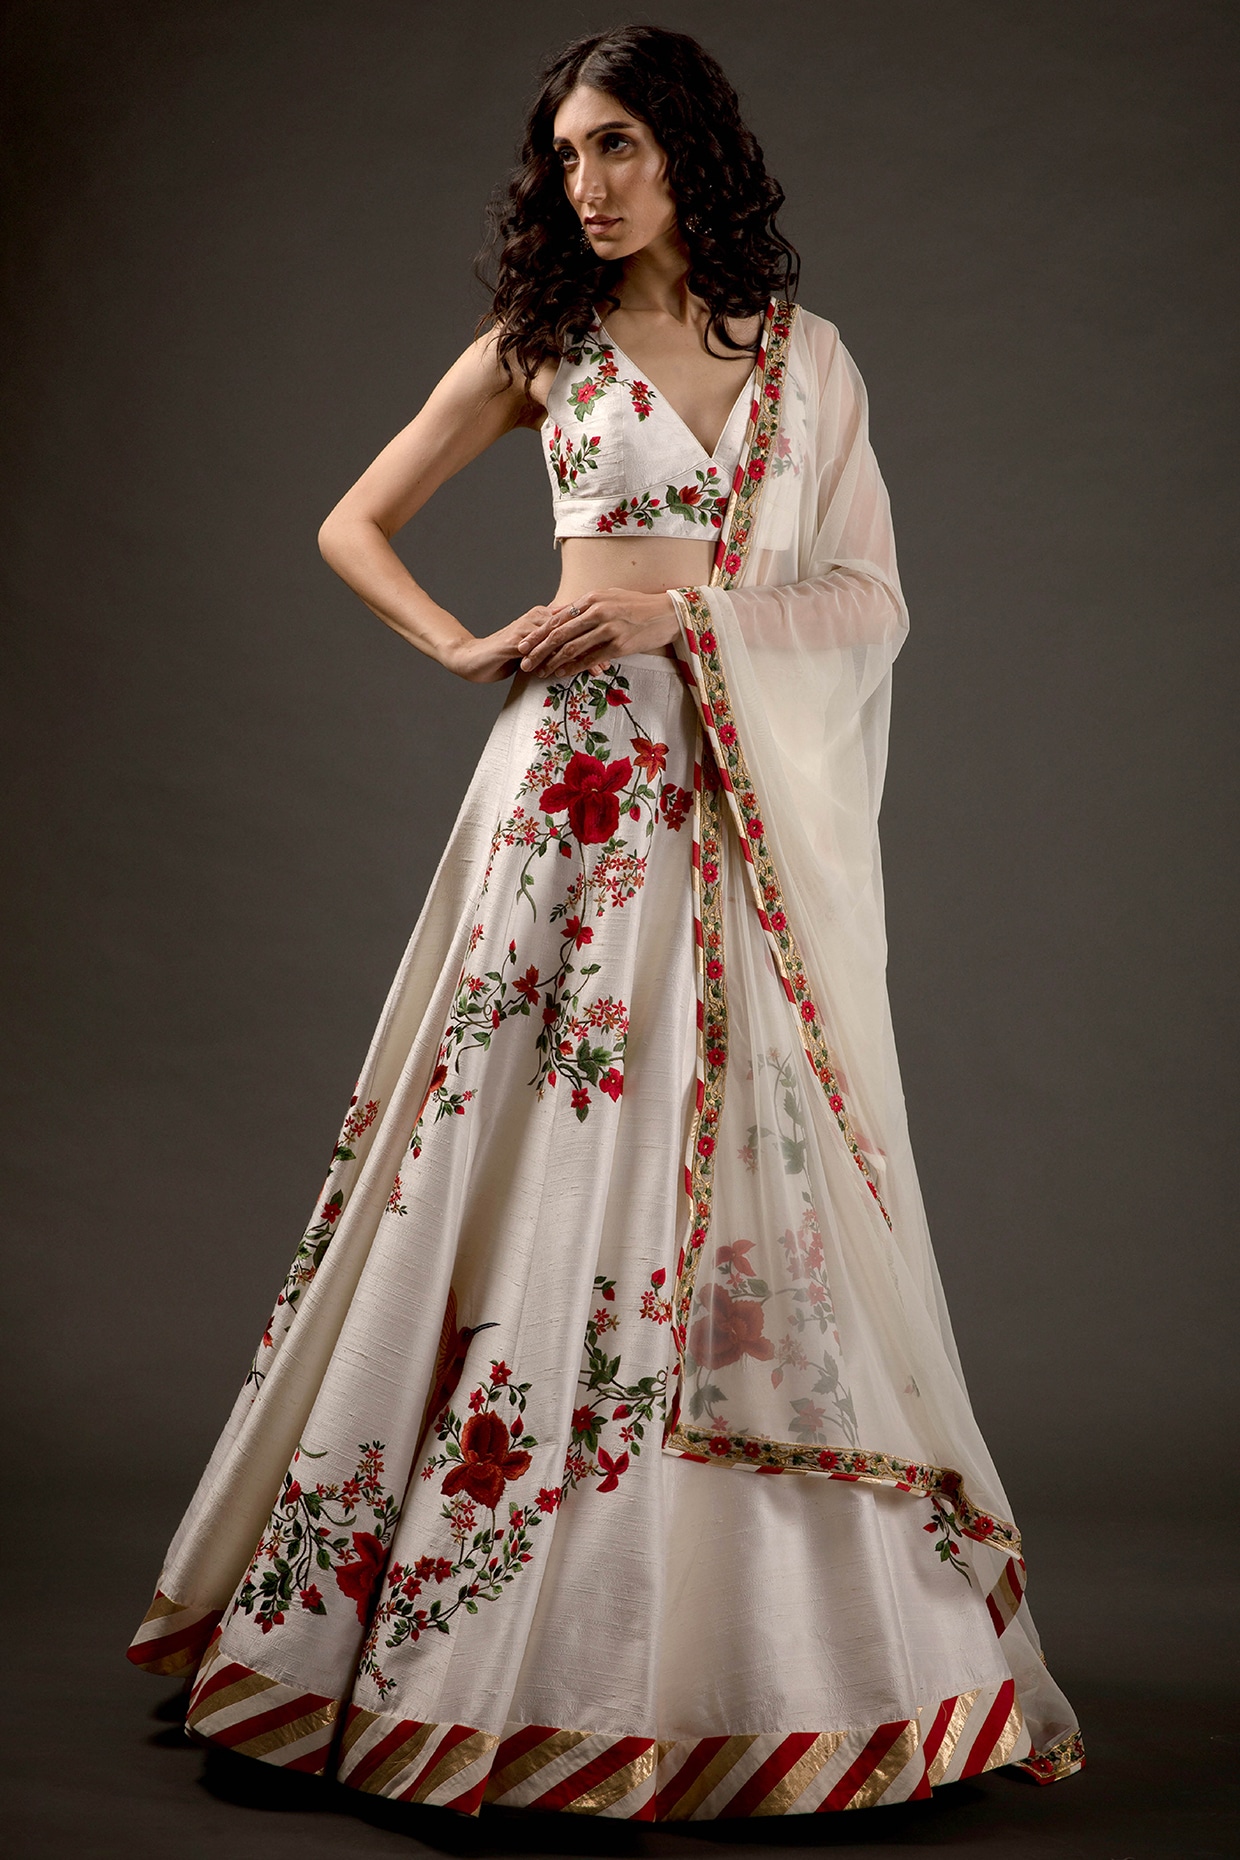 Rohit Bal Couture Collection 2016 Is Inspired By Opulence & Excess